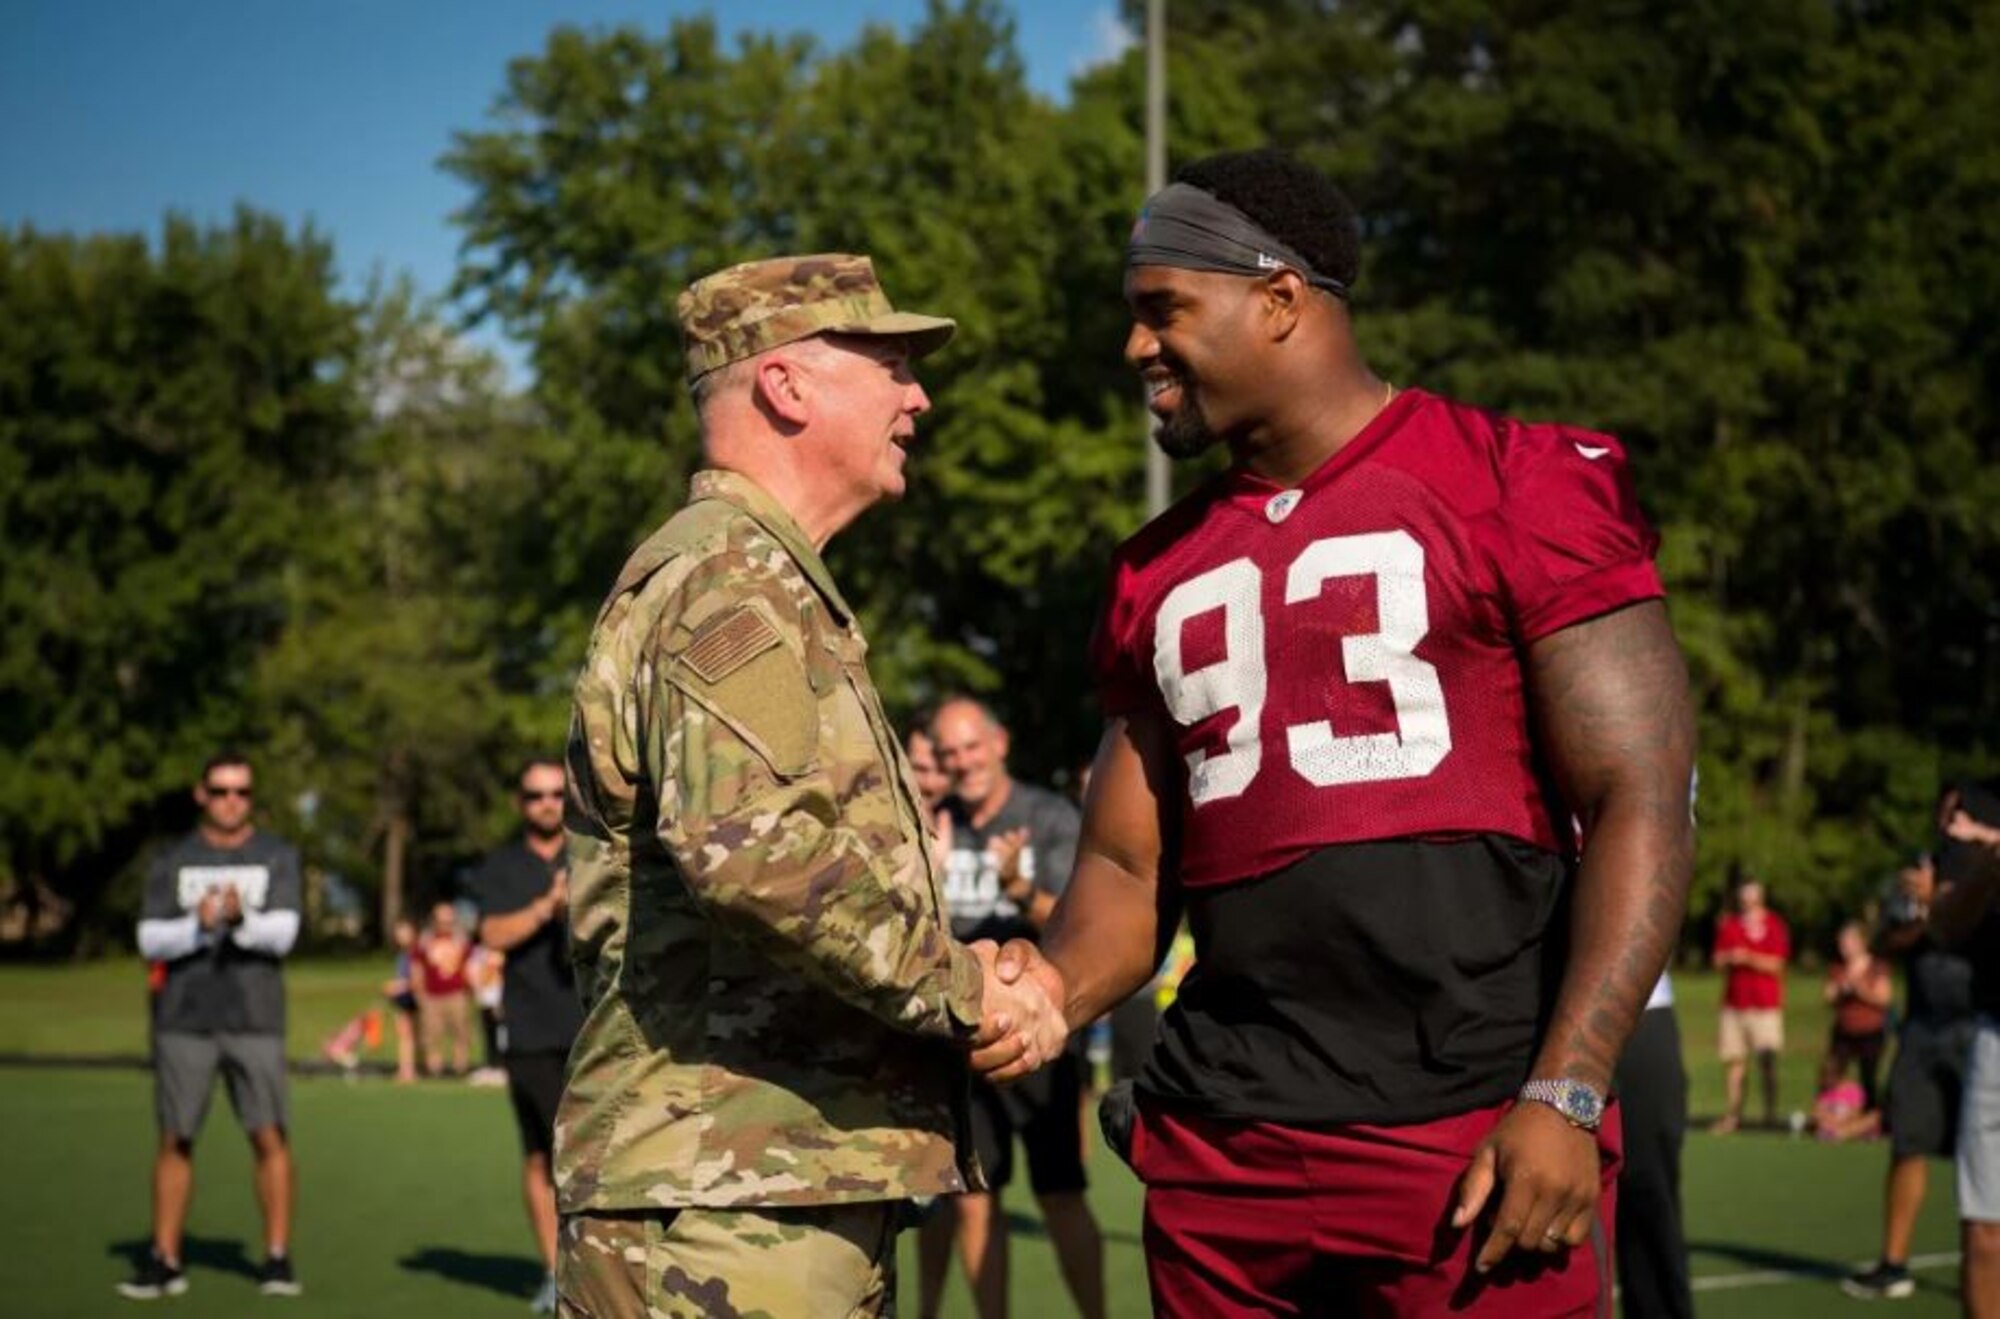 Air Force District of Washington Commander Maj. Gen. Ricky N. Rupp shakes hands with Washington Redskins defensive end Jonathan Allen Aug. 14. The team held a special walkthrough practice at Joint Base Andrews as part of ongoing Redskins Salute efforts presented by USAA.(Courtesy photo/Washington Redskins)